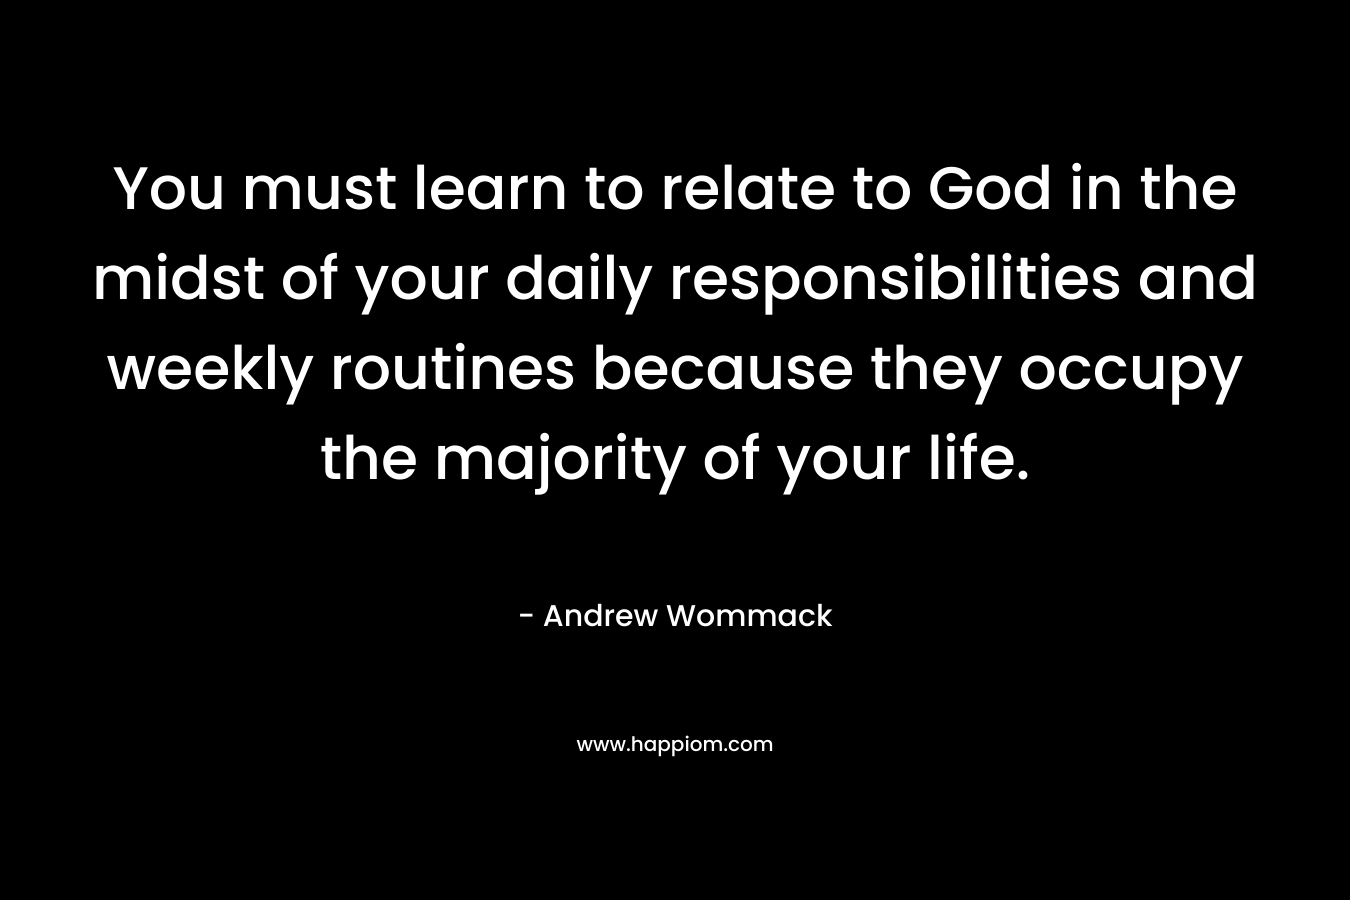 You must learn to relate to God in the midst of your daily responsibilities and weekly routines because they occupy the majority of your life.